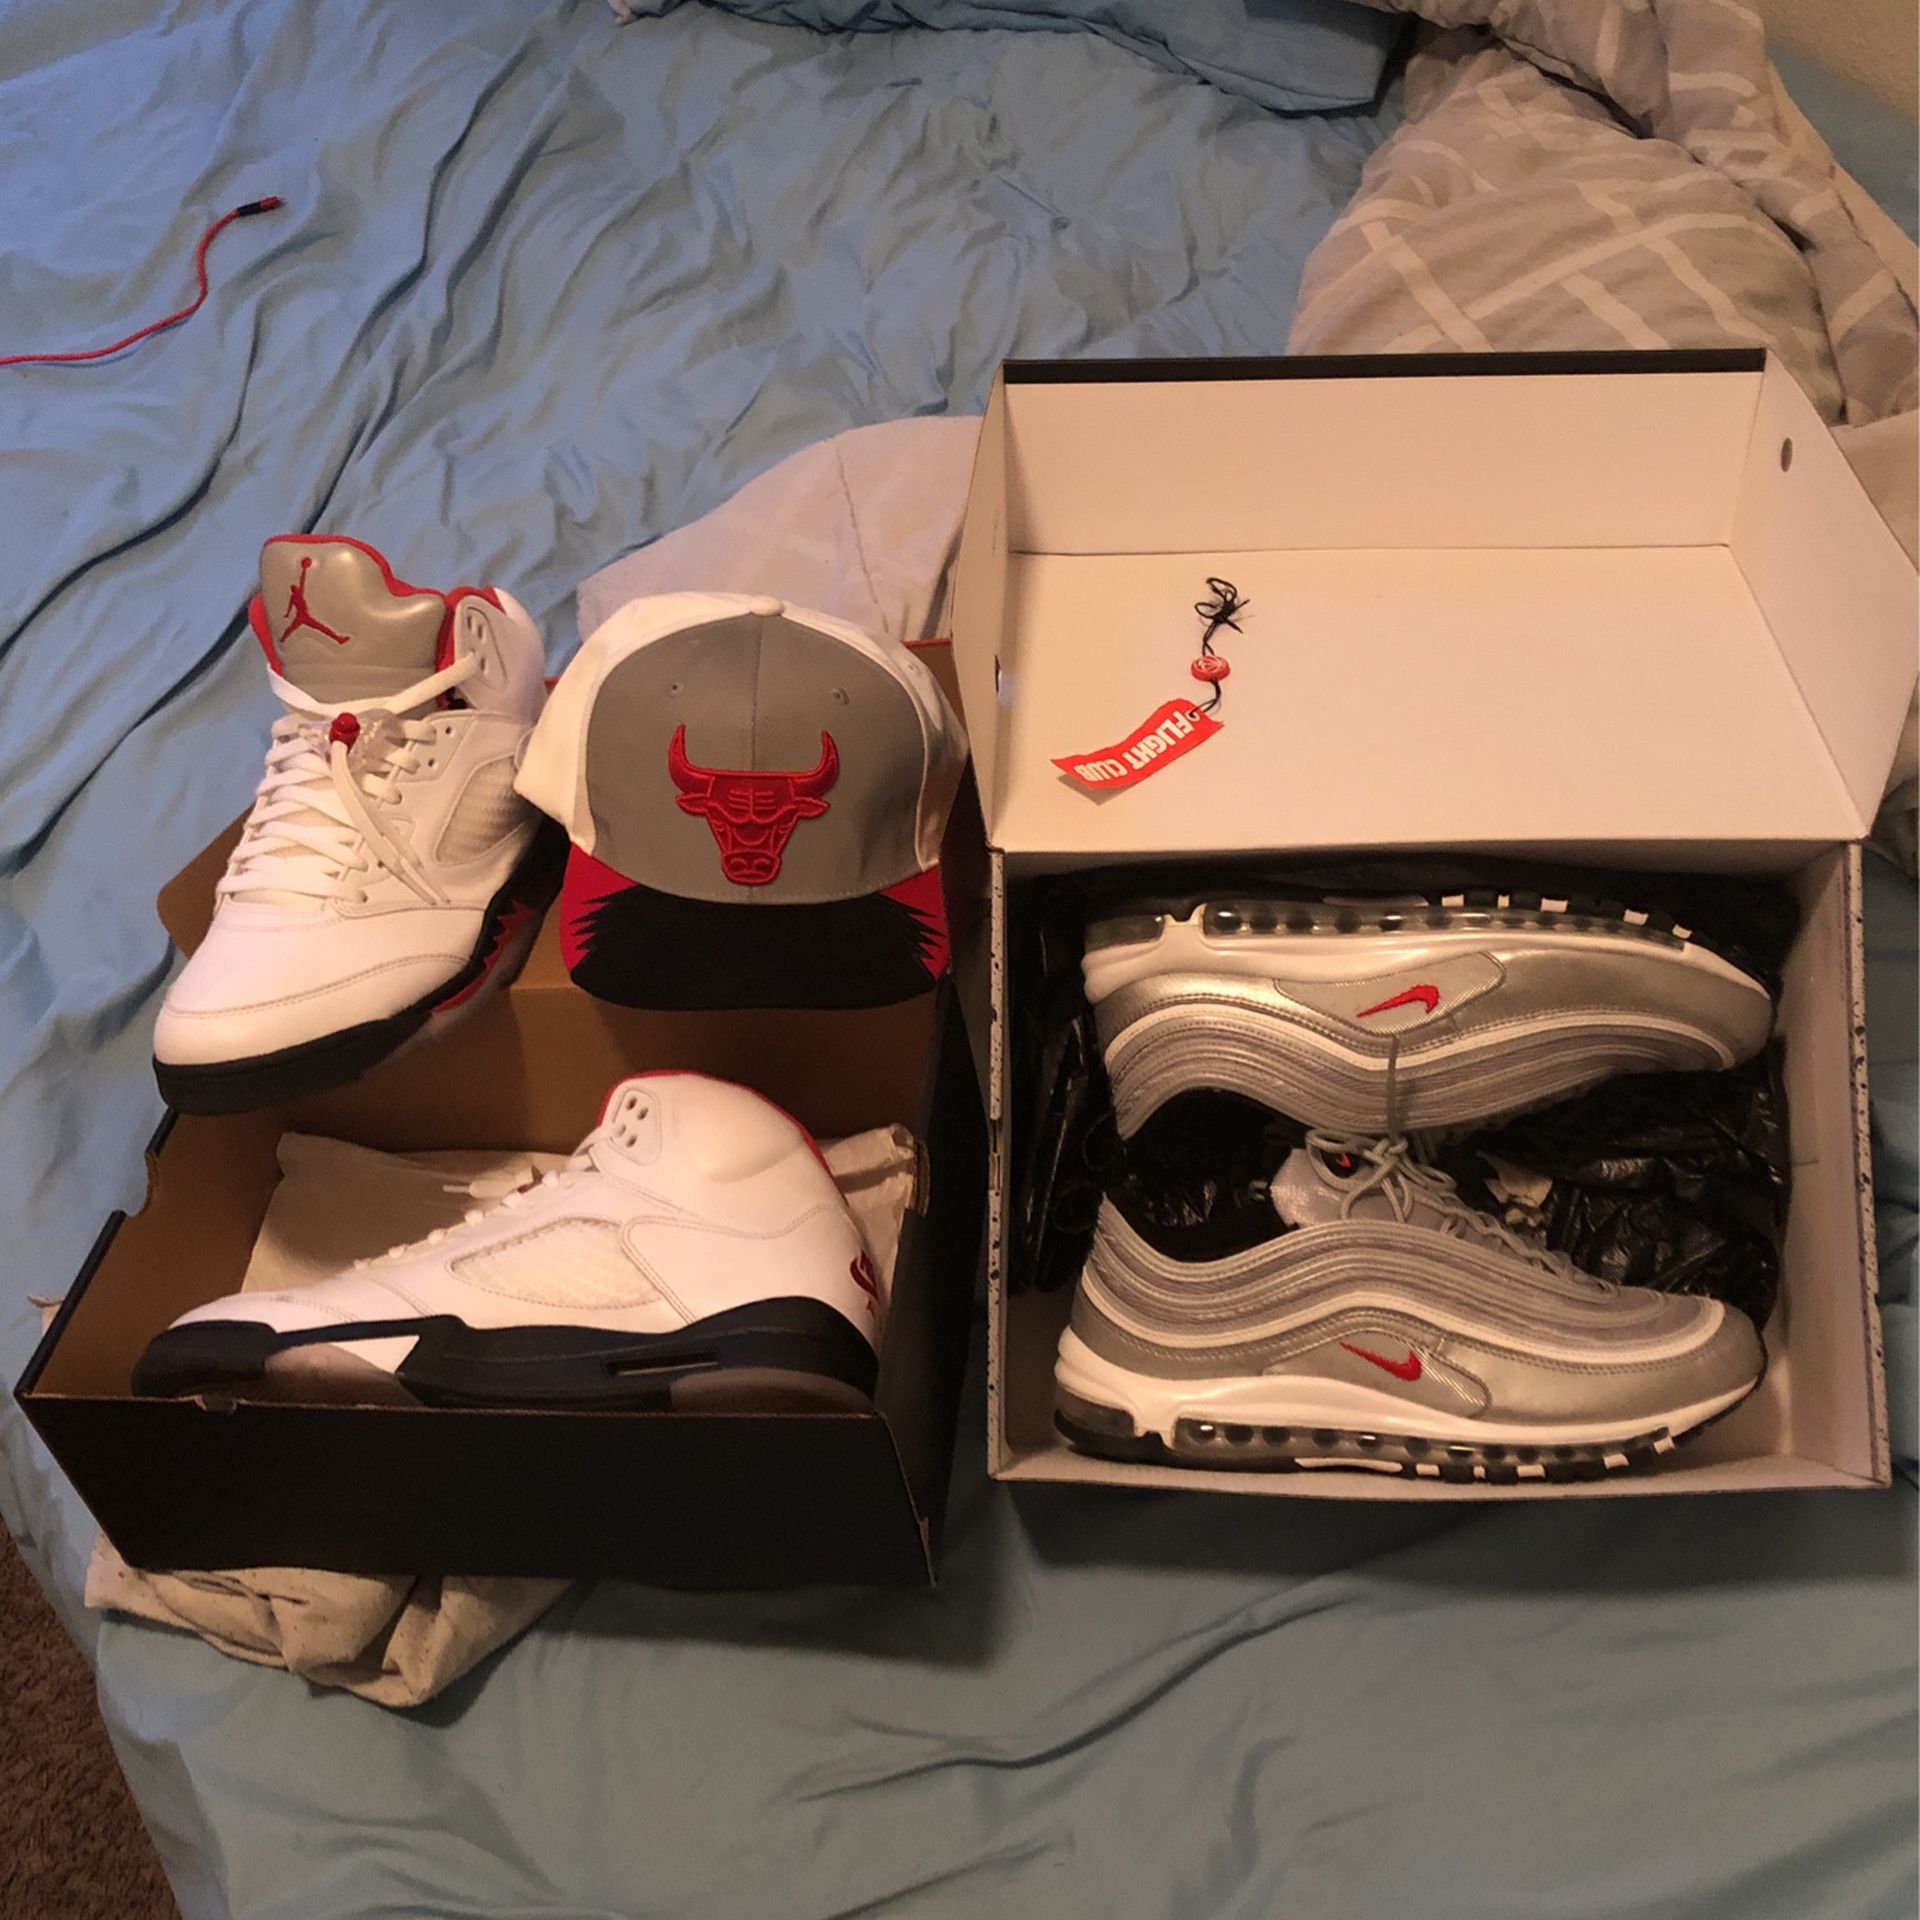 Jordan 5 2022 From Flight Cloud matching Mitchell And Ness Hat And Air Max 97 From Flight Club Both Literally Brand New 